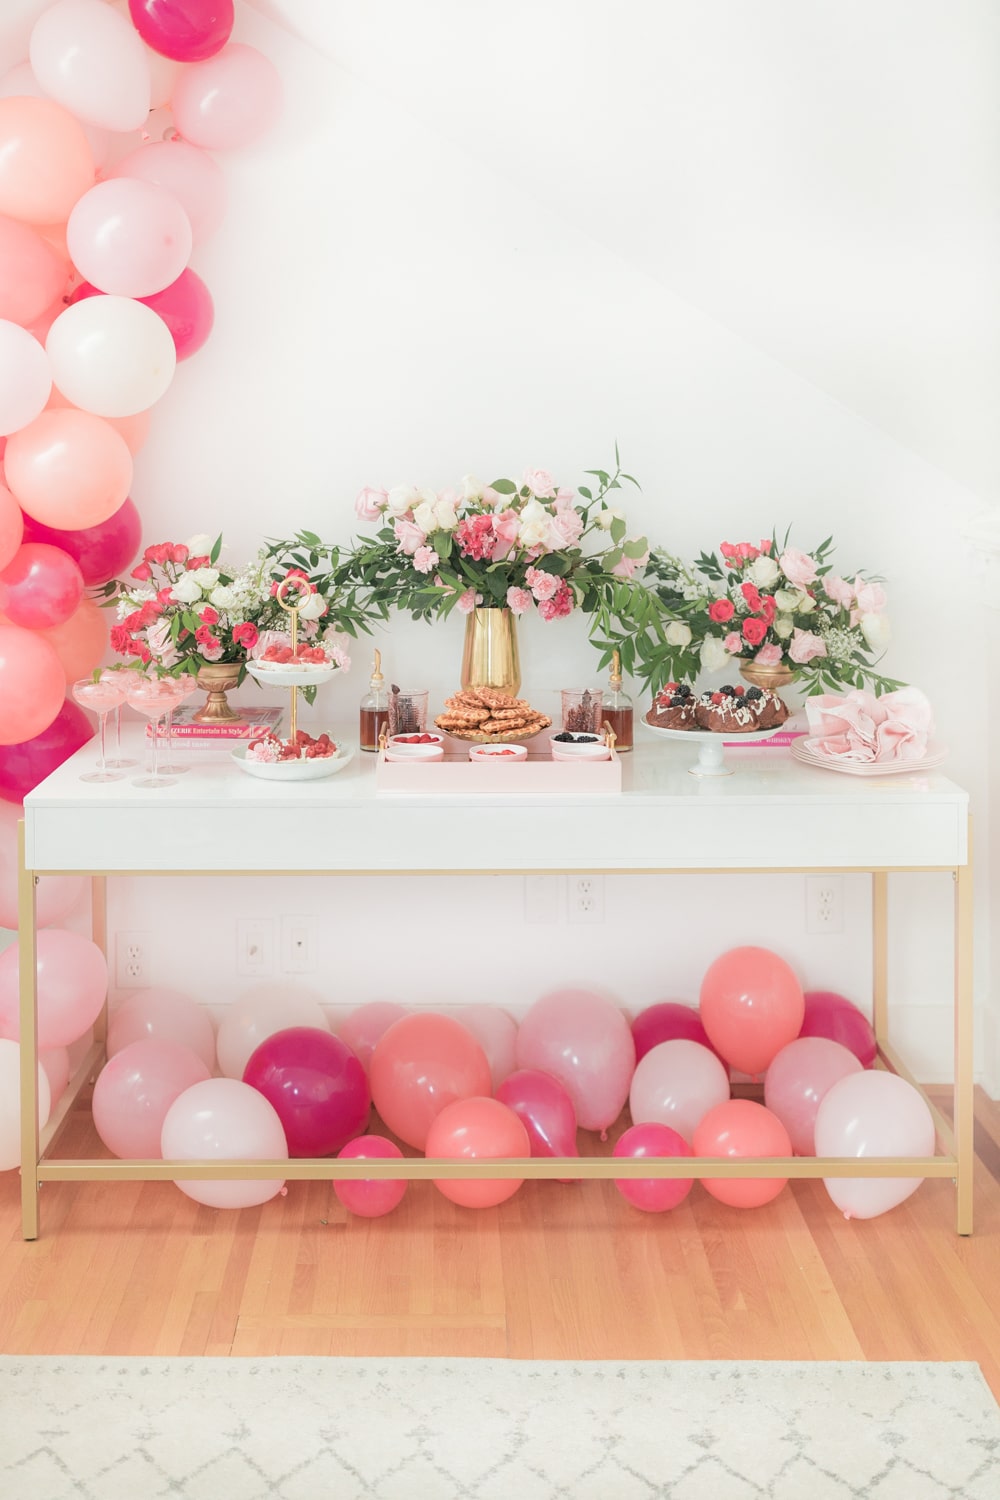 Galentine's Day recipes and decorations created by blogger Stephanie Ziajka on Diary of a Debutante